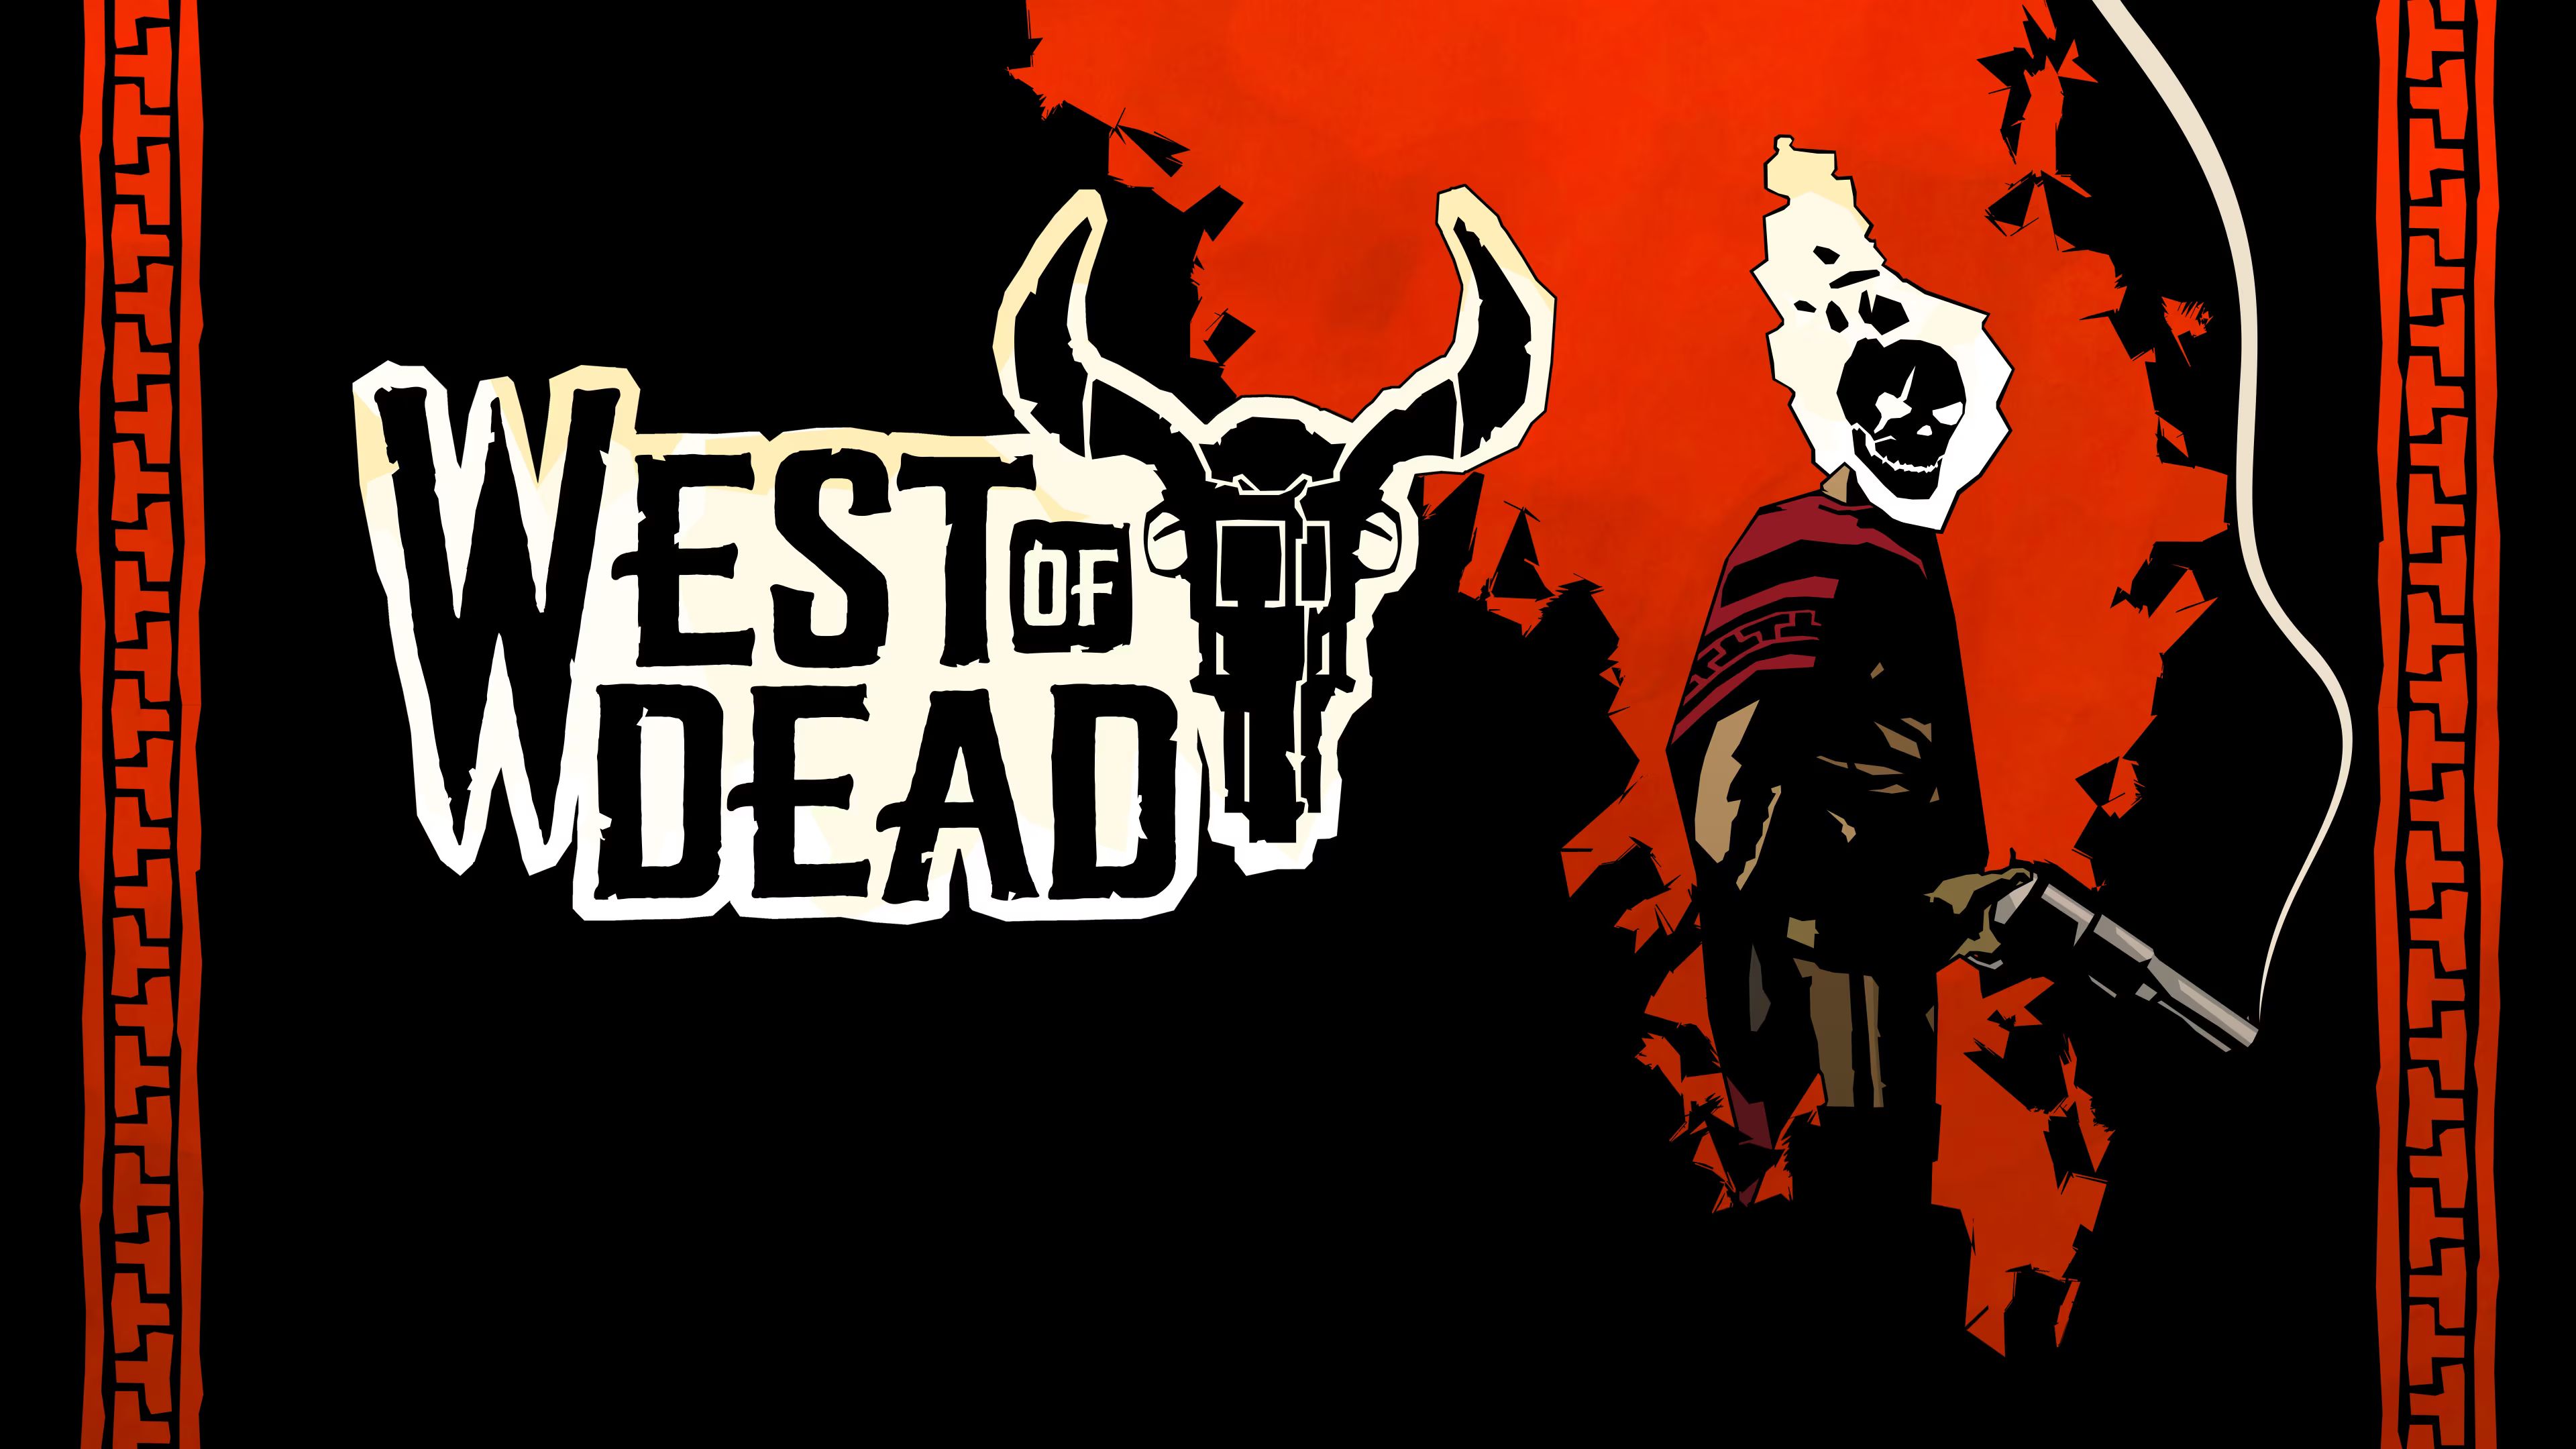 West of Dead: Path of the Crow